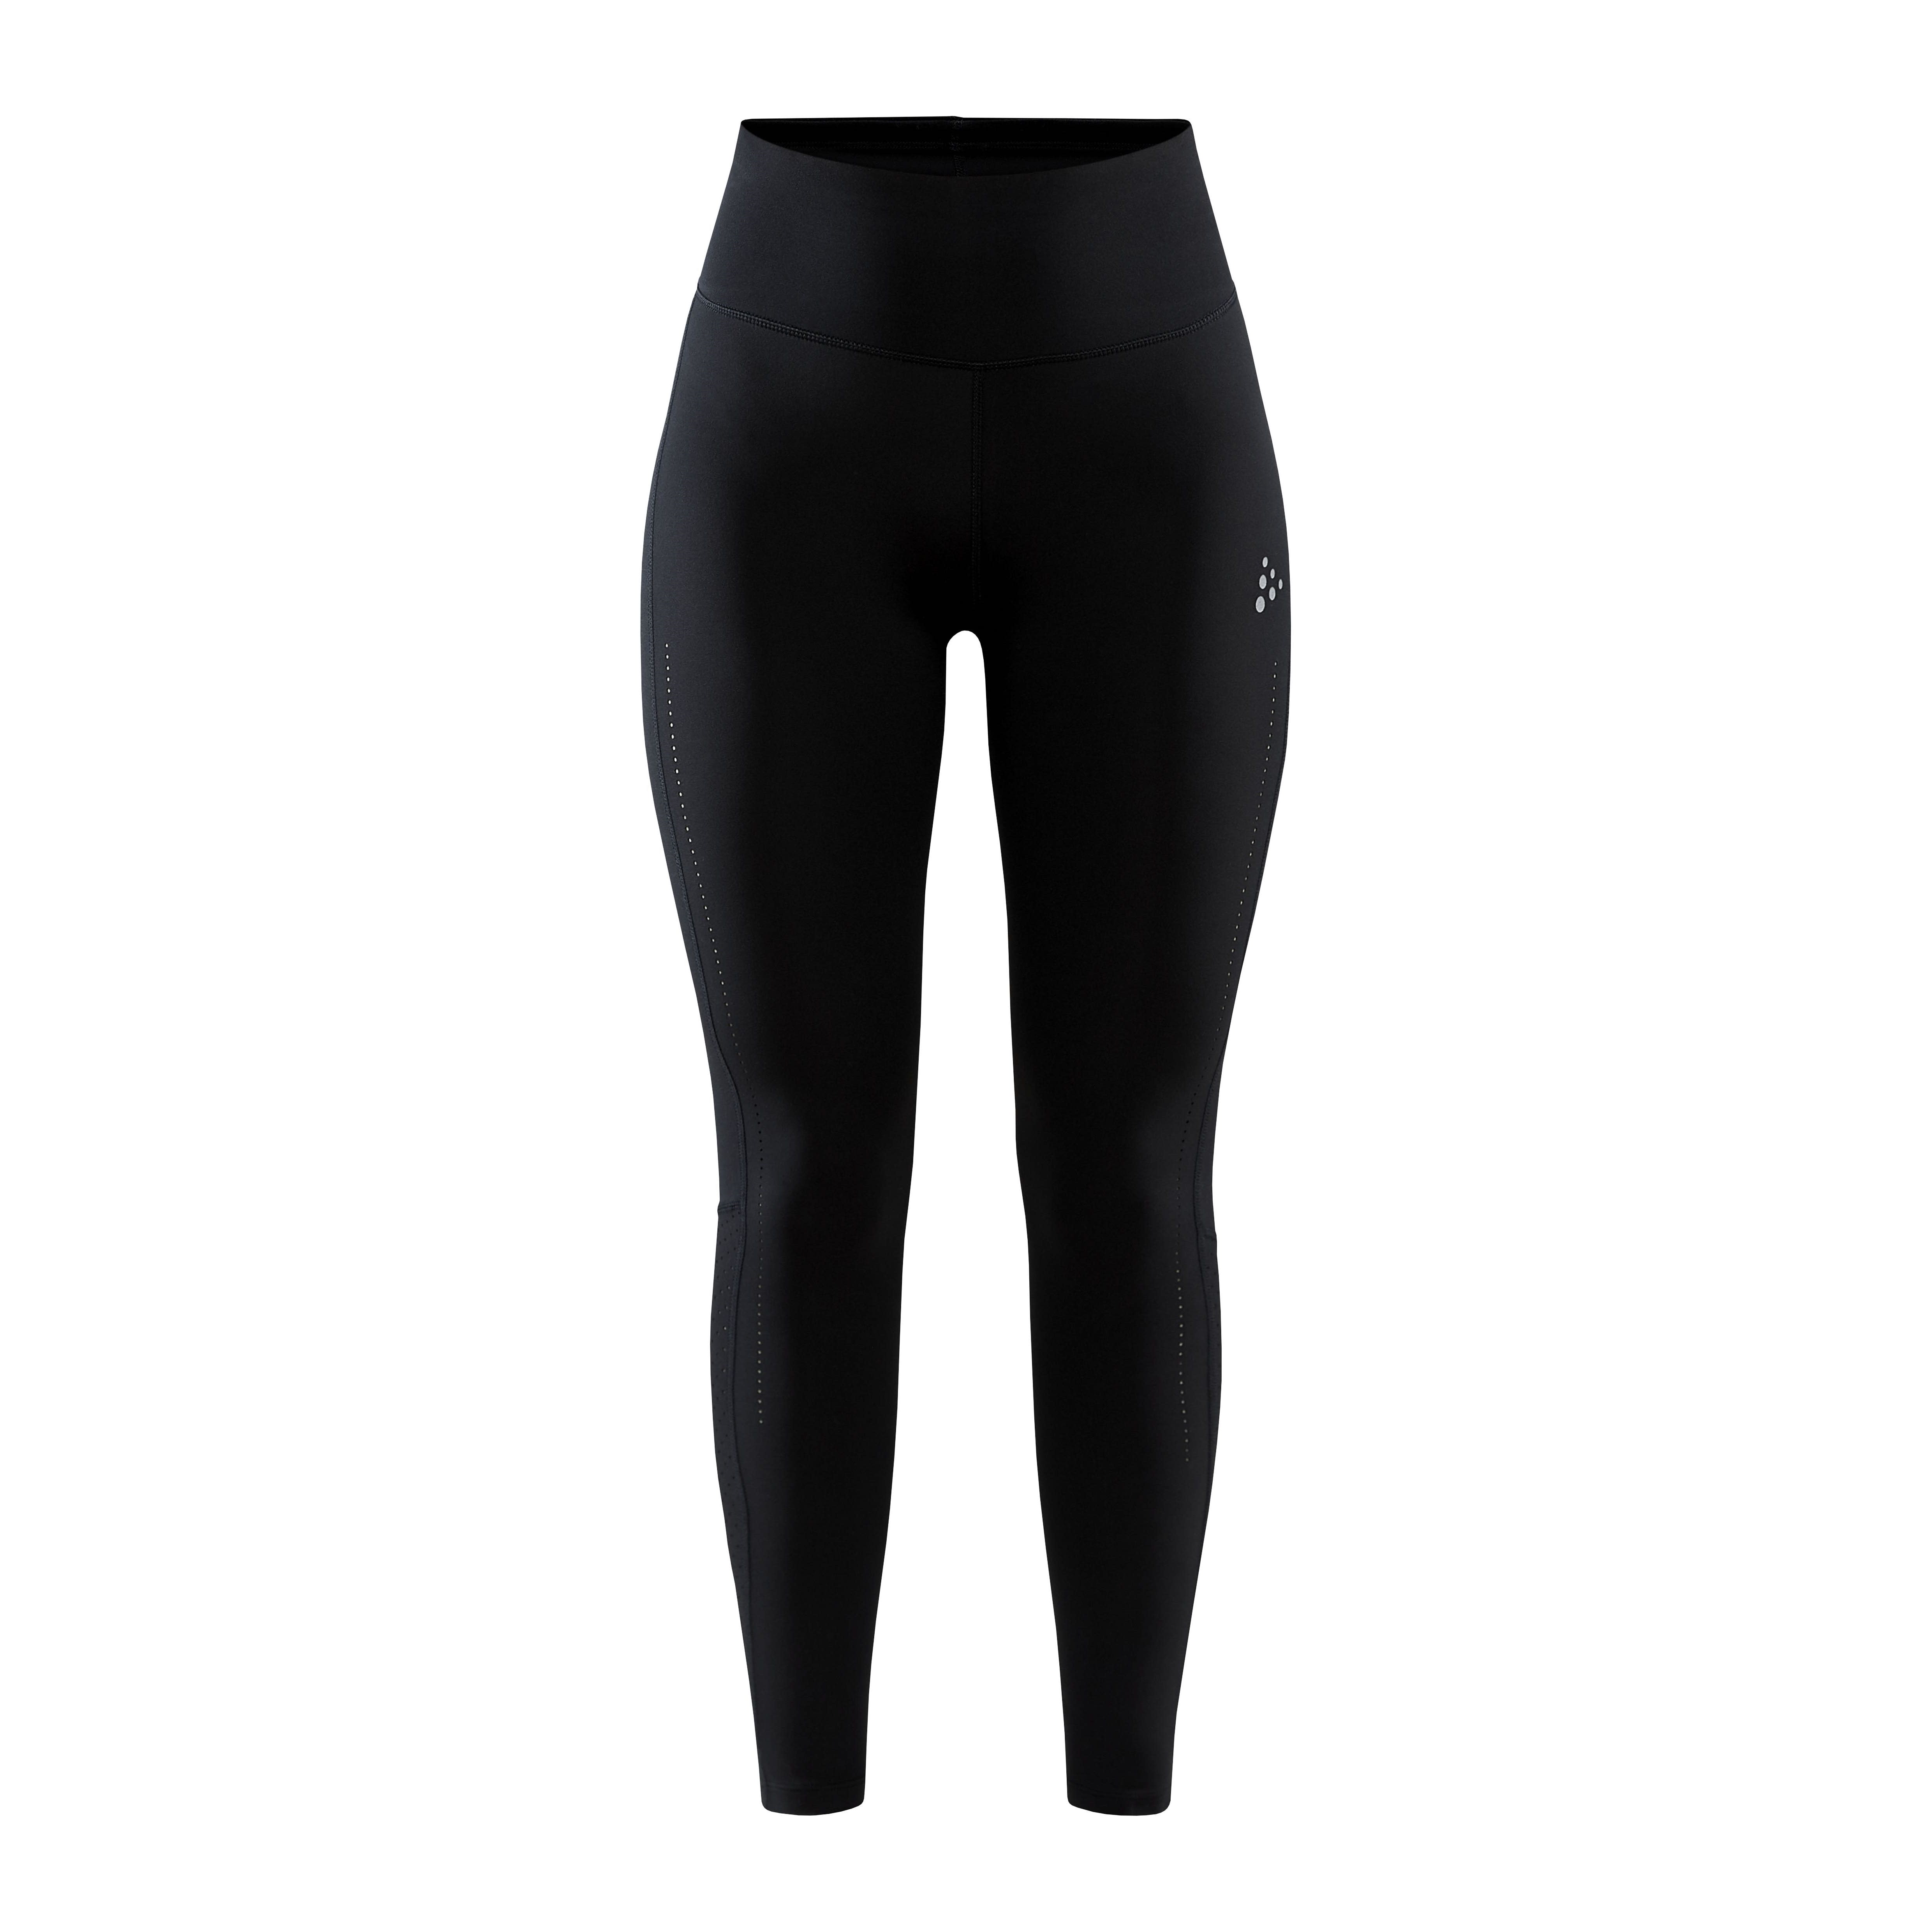 Women's Adv Charge Perforated Tights Black, Buy Women's Adv Charge Perforated  Tights Black here